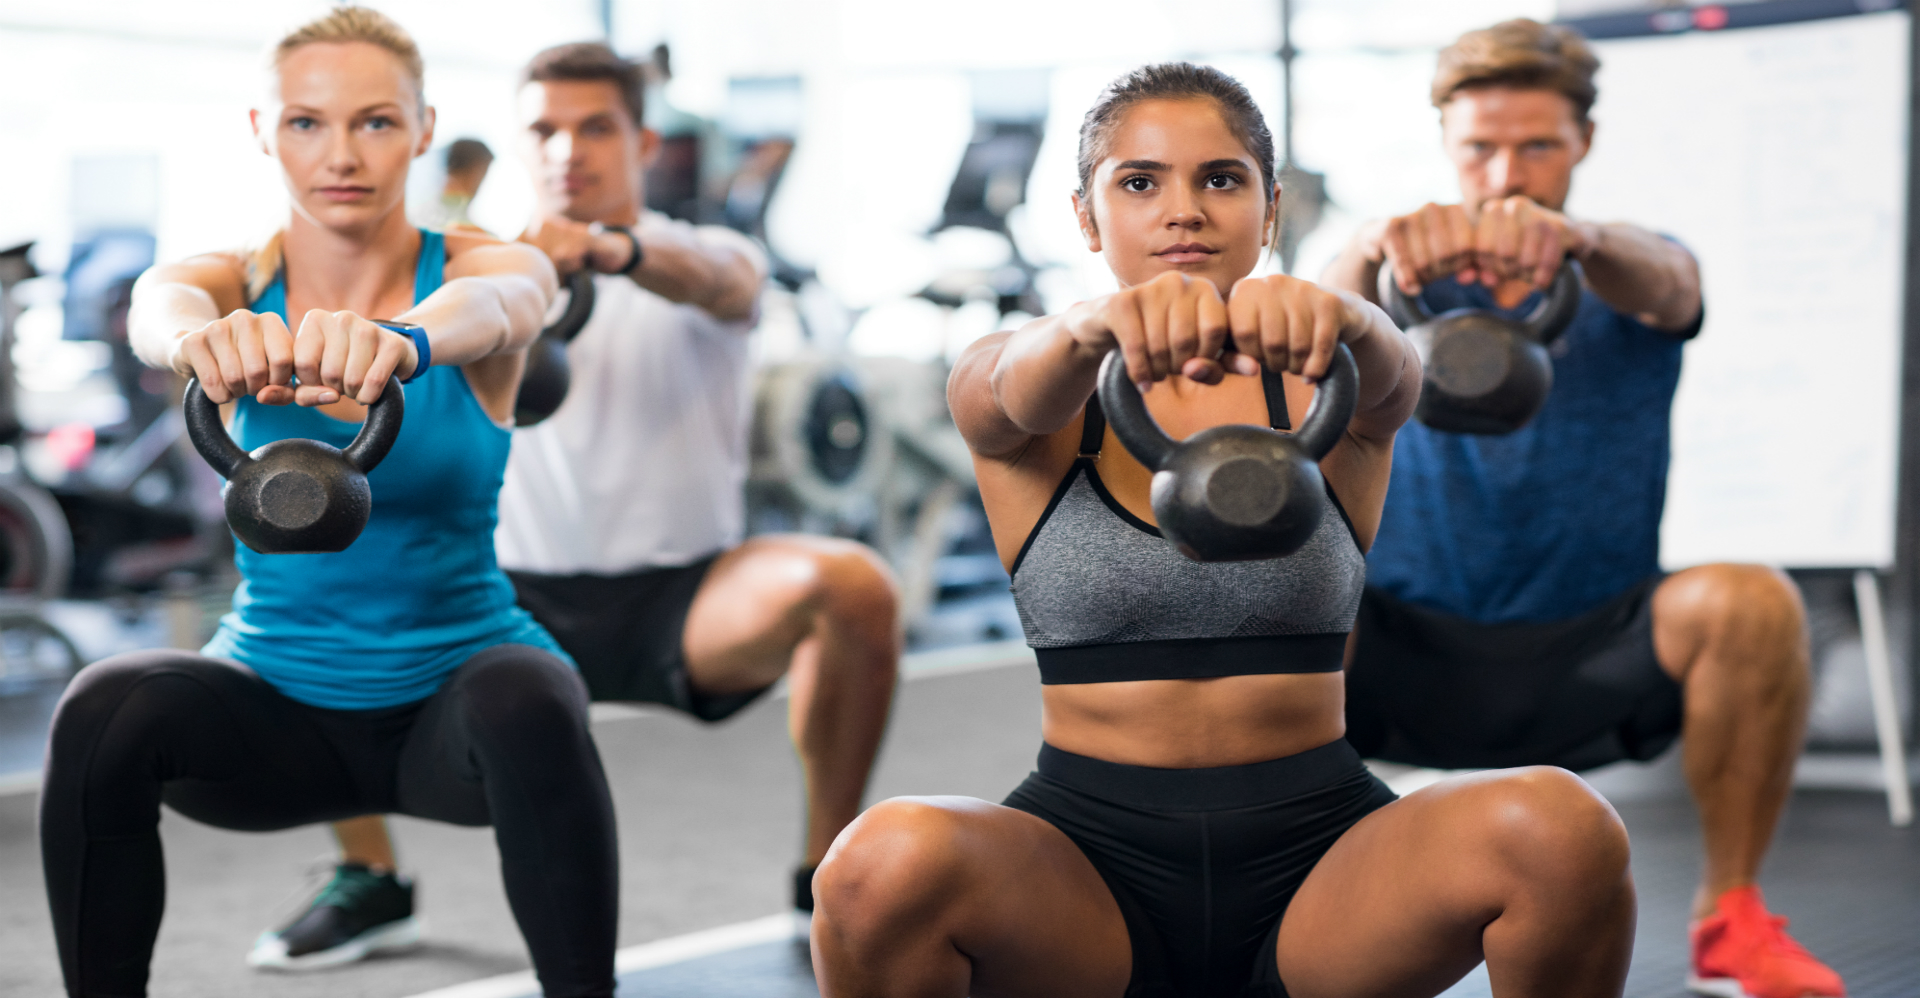 Are Group Workout Programs Good for Beginners